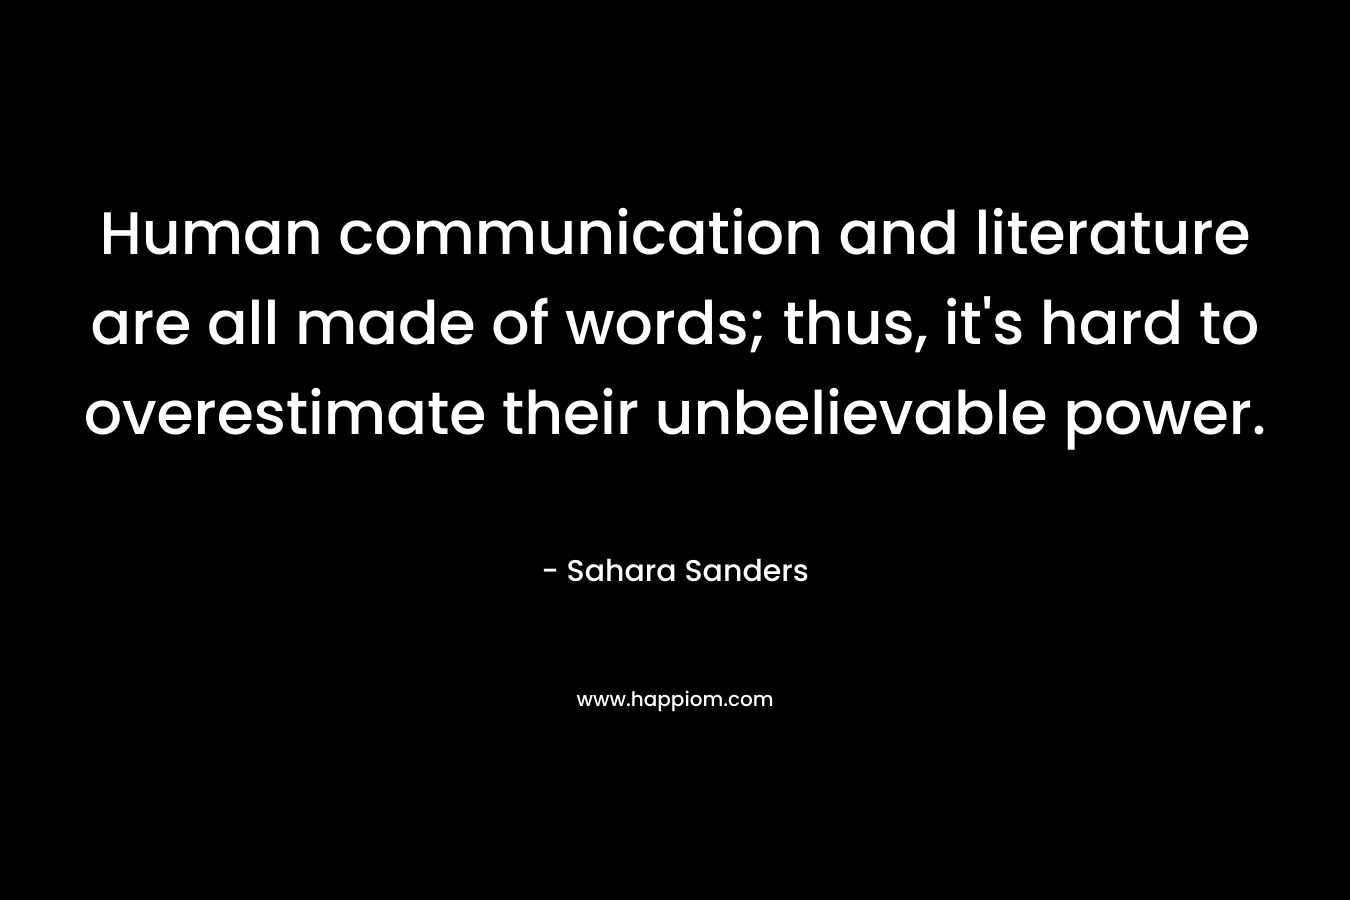 Human communication and literature are all made of words; thus, it’s hard to overestimate their unbelievable power. – Sahara Sanders